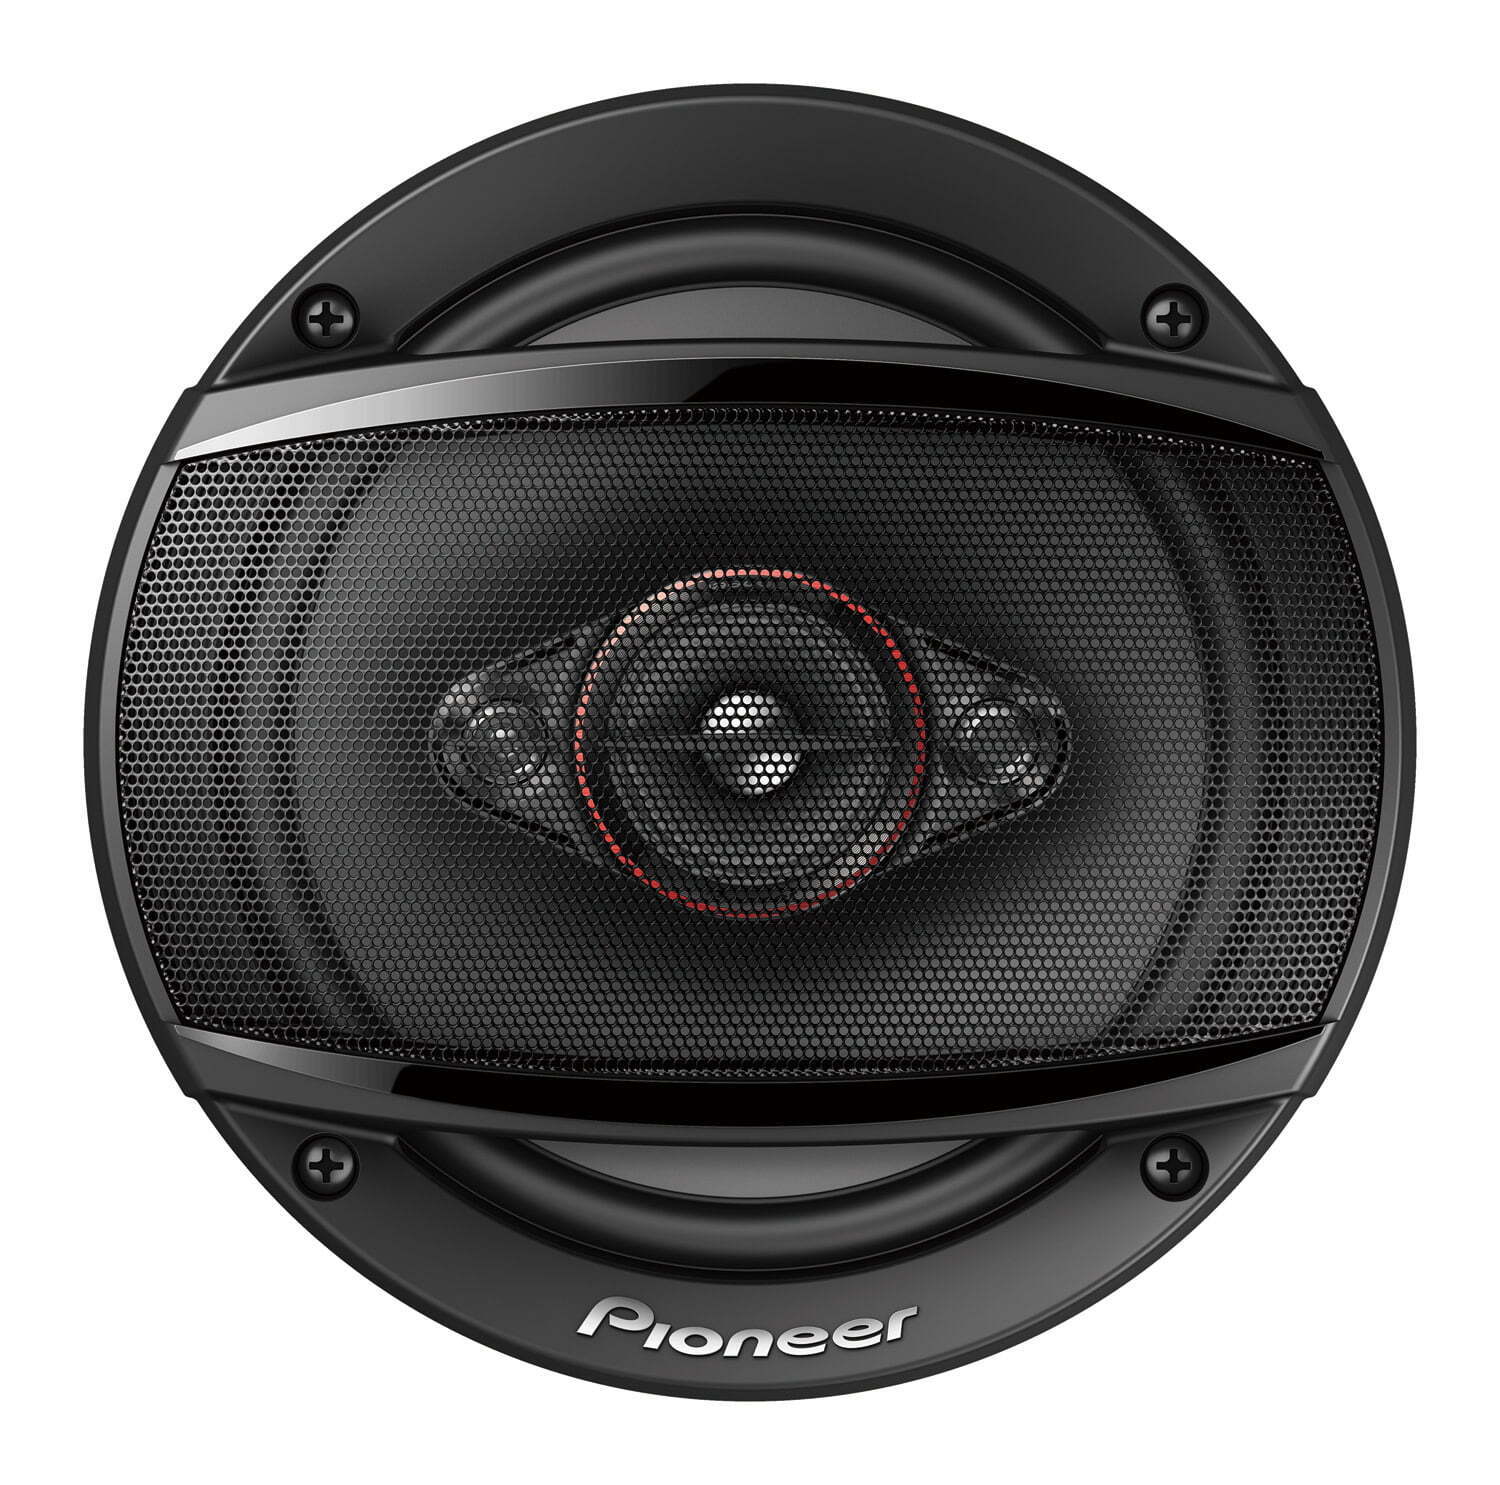 Pioneer TS-600M 6-1/2" 4-Way Full Range Coaxial Car Stereo Speakers, 320W Max Power - image 2 of 5